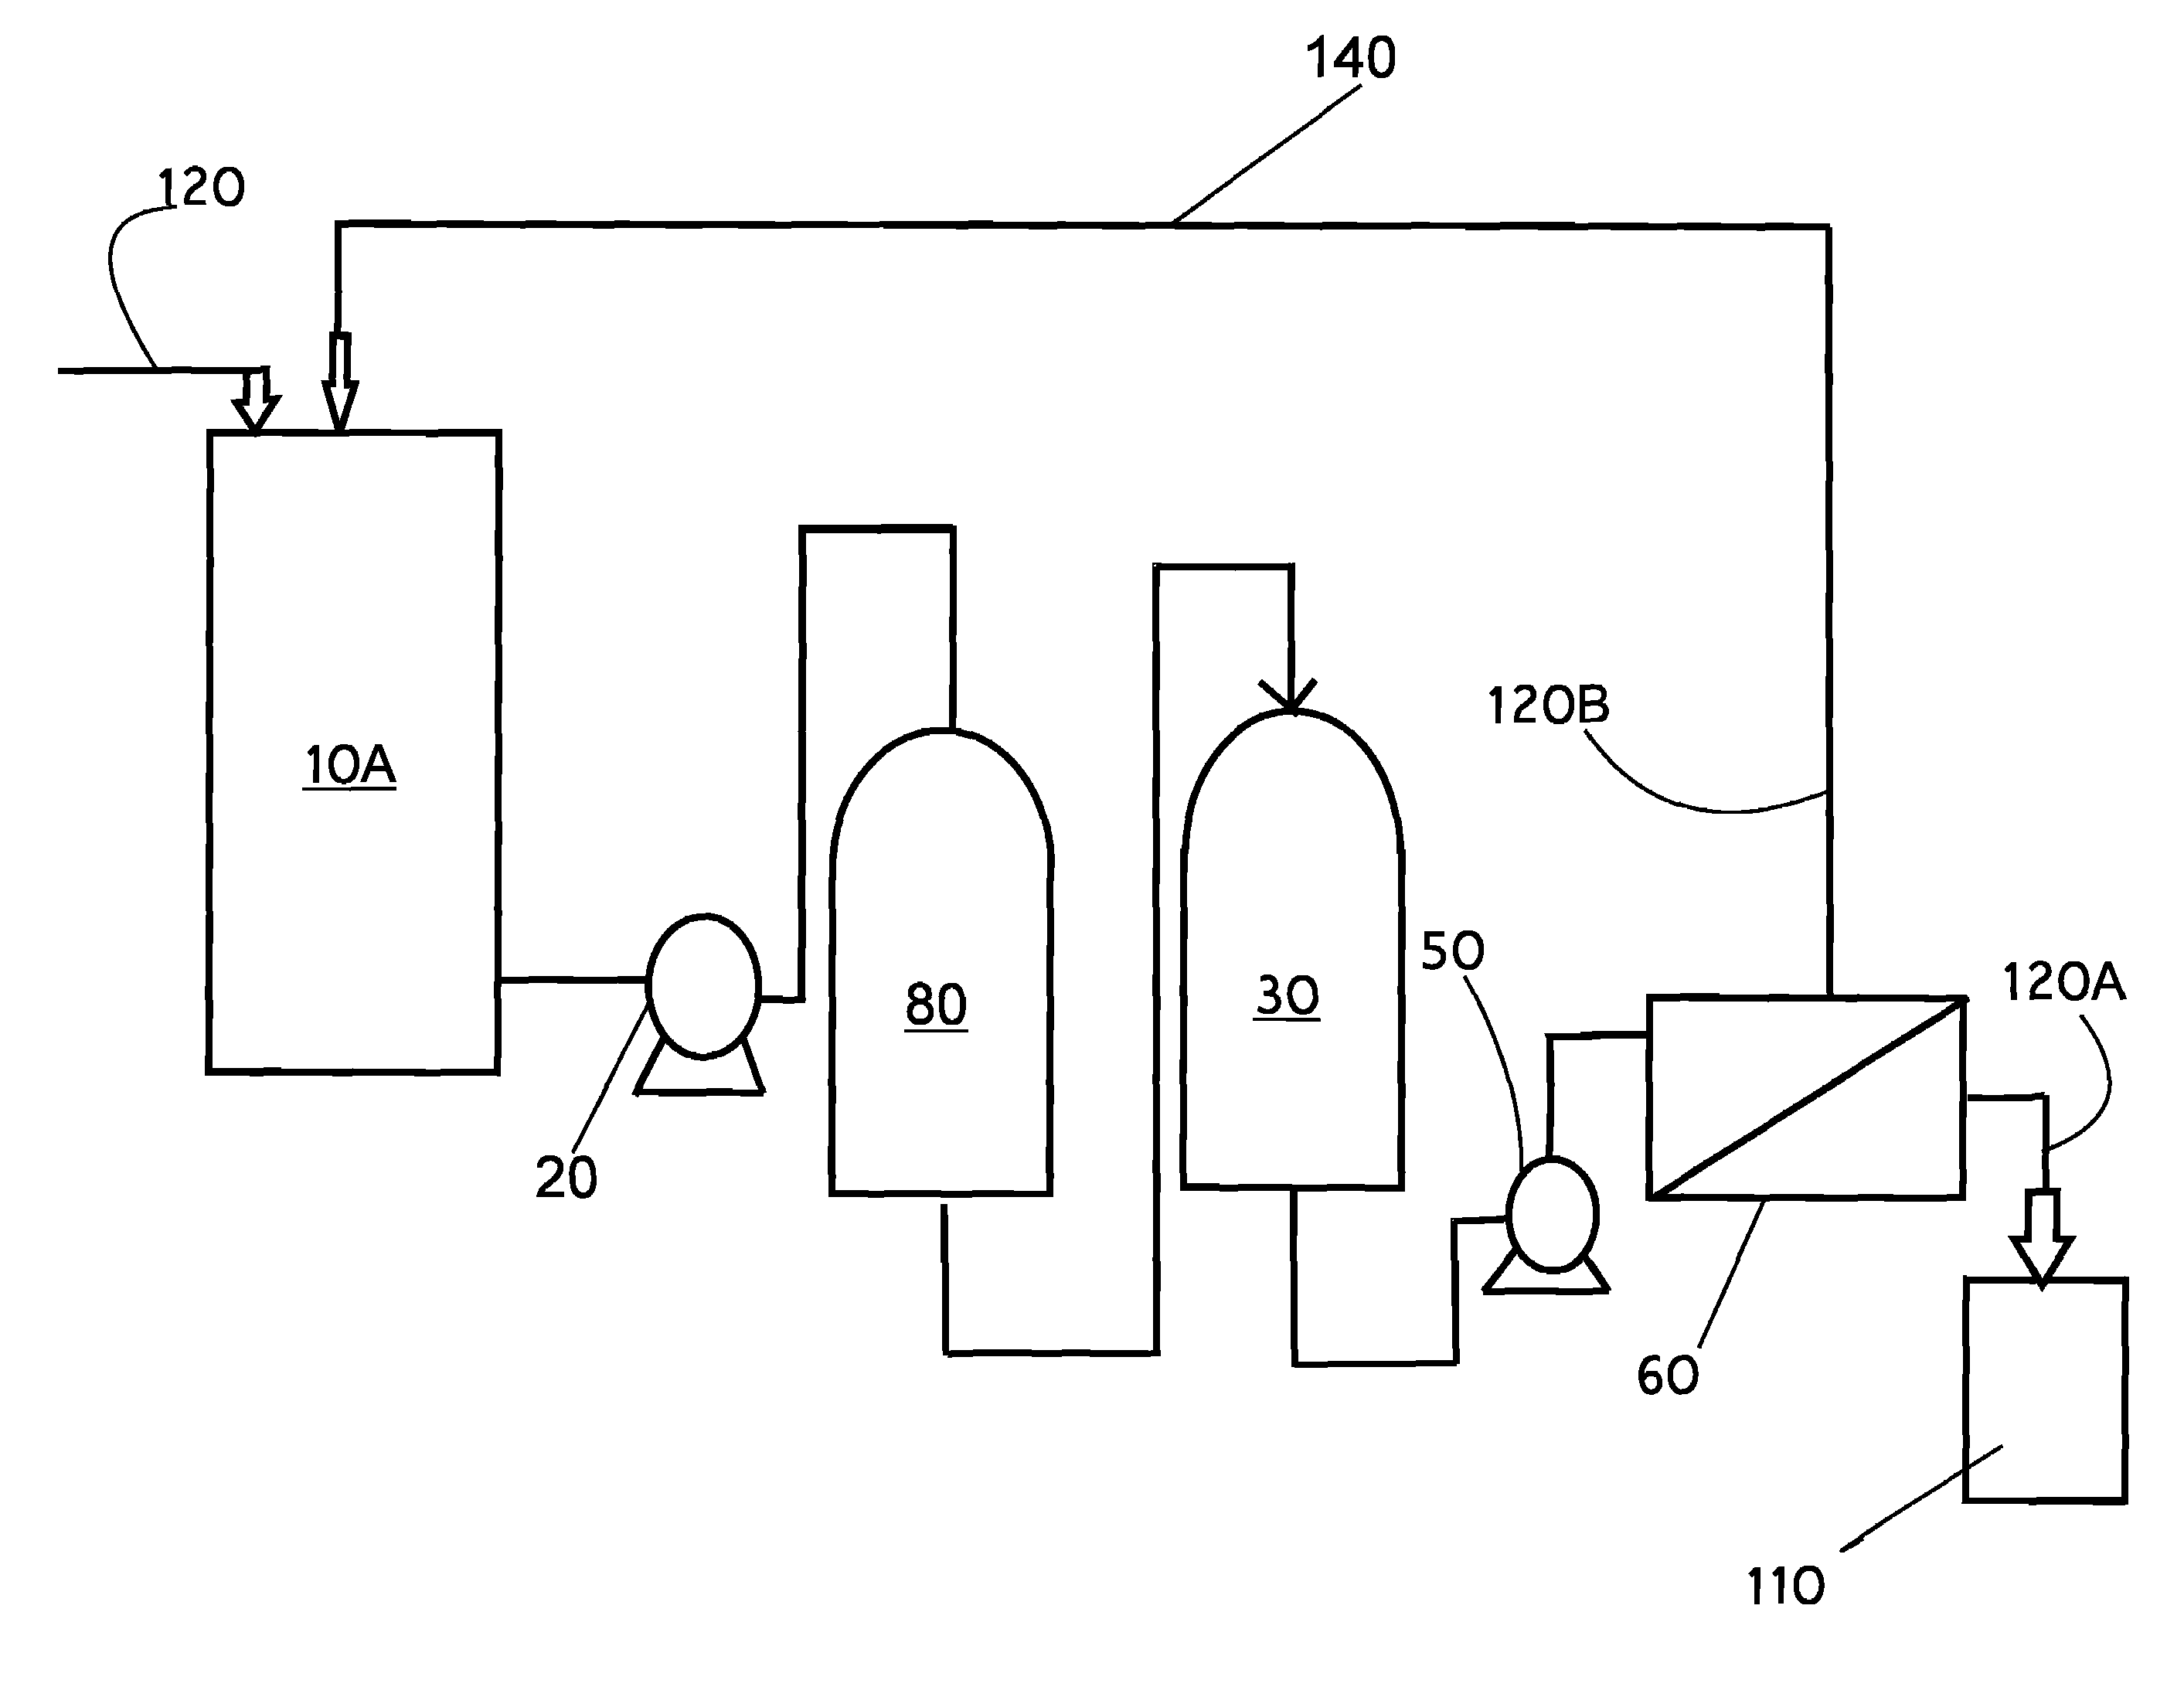 Method of rendering a radioactive and aqueous heat transfer liquid in a nuclear reactor to a reduced radwaste quantitative state and returning the remaining waste water volumes to an environmental release point for liquid effluents